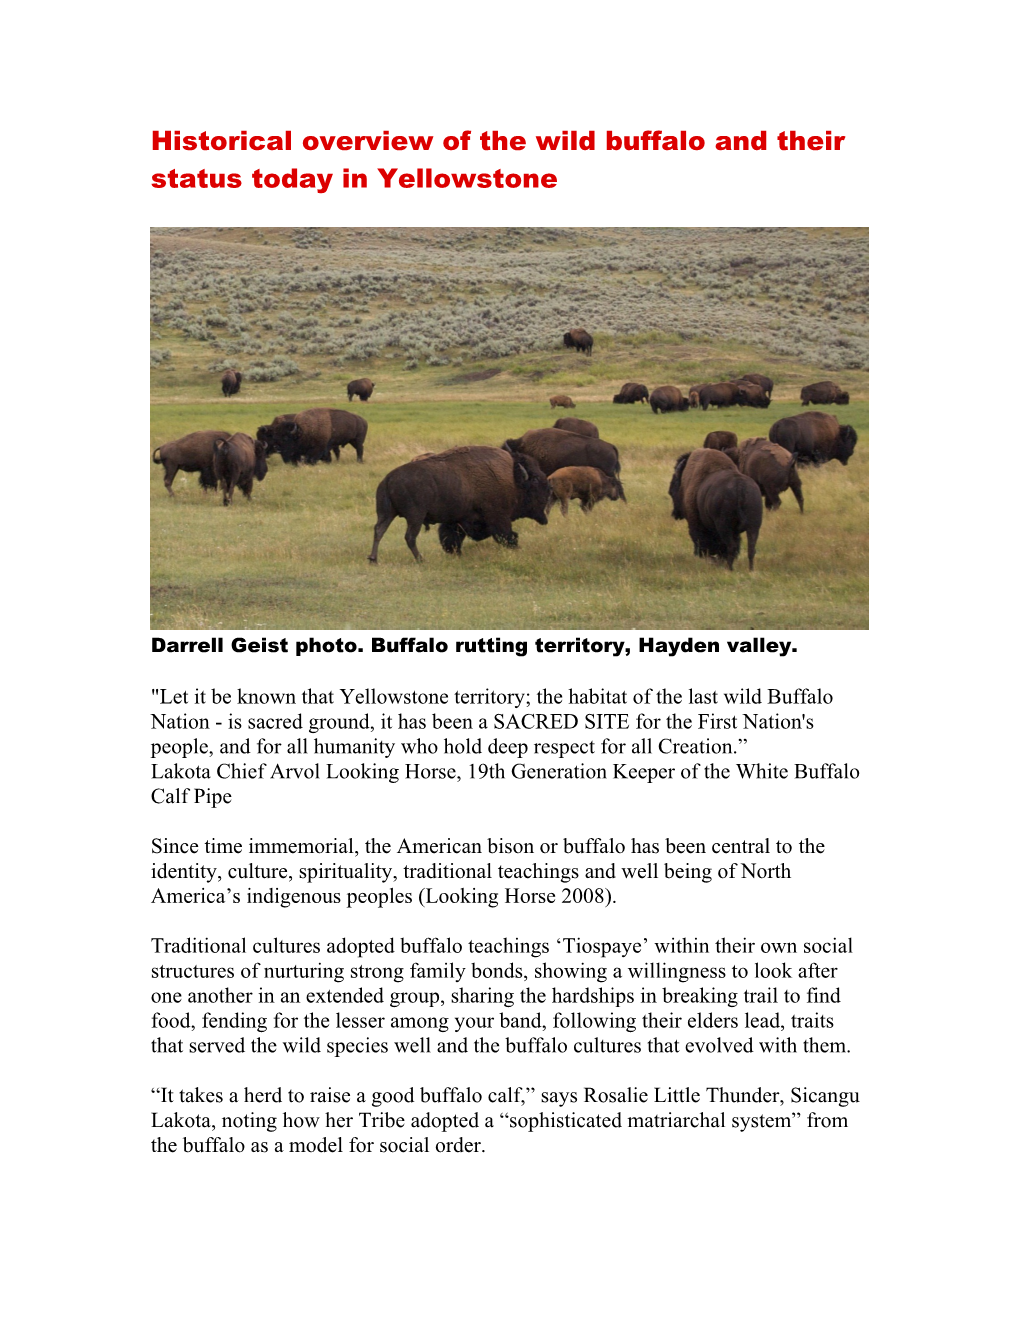 Since Time Immemorial, The Indigenous American Bison Or Buffalo Has Been Central To The Identity And Well Being Of North Americ